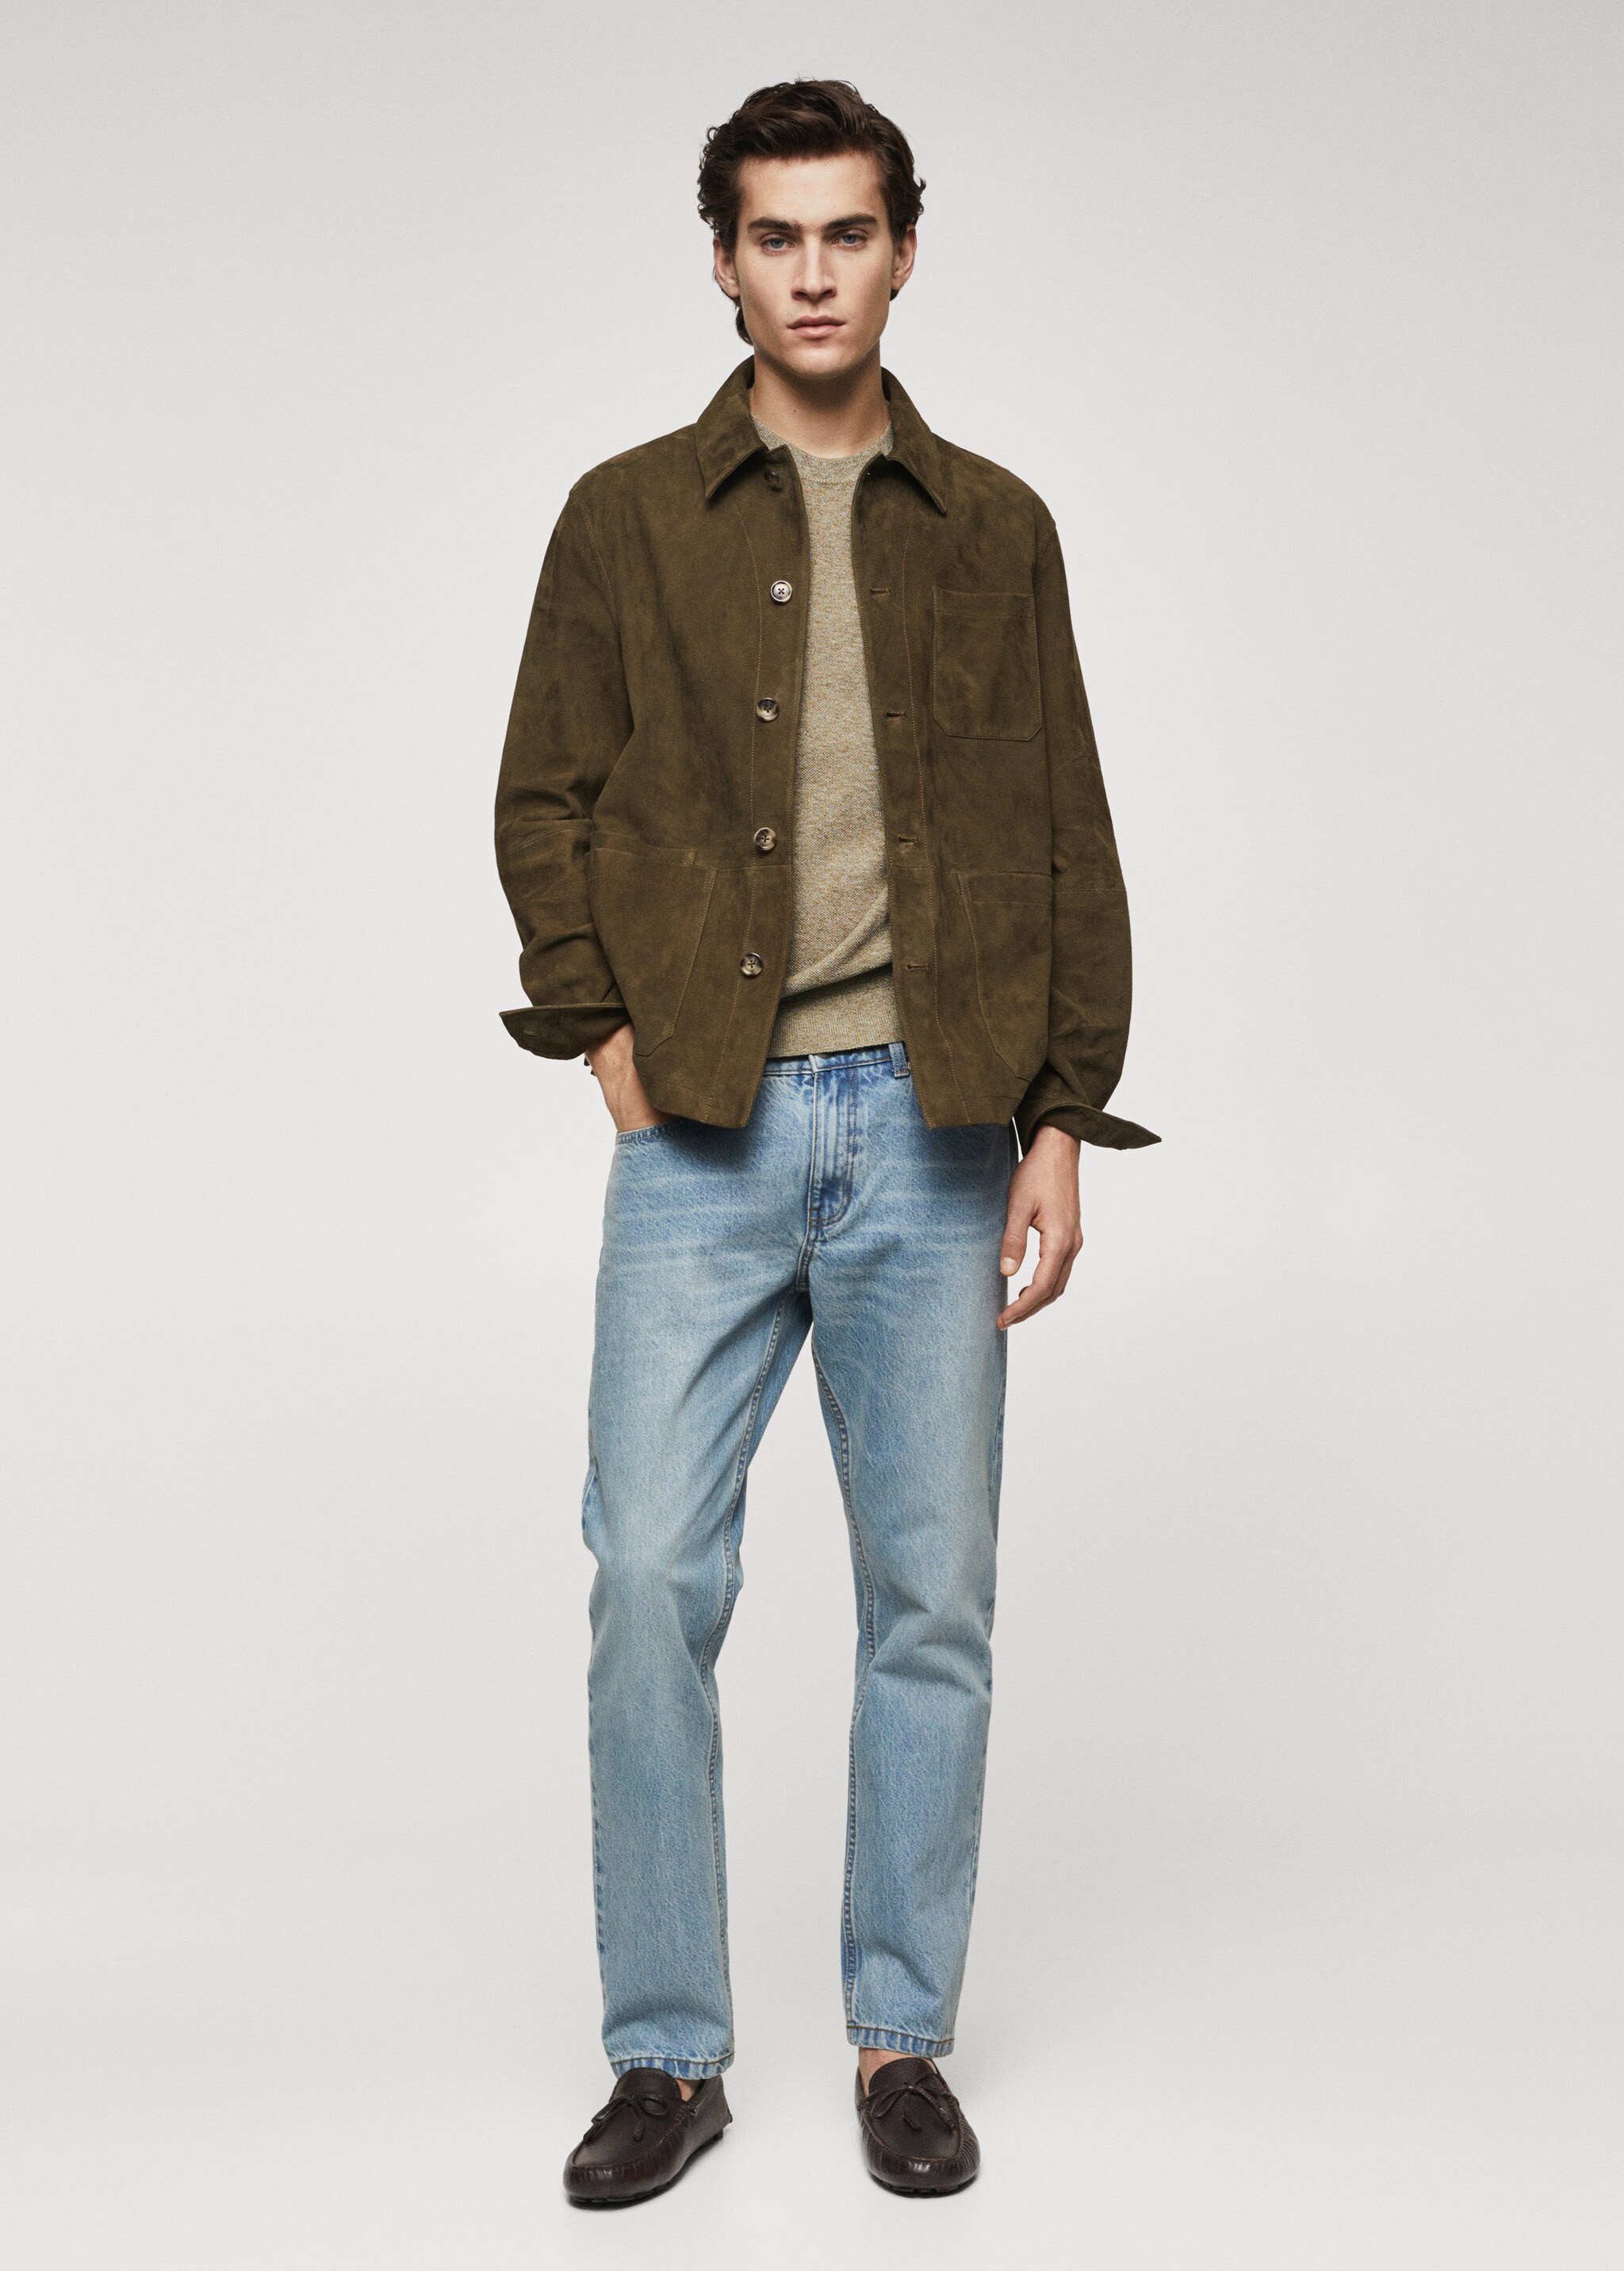 Suede overshirt with pockets - General plane